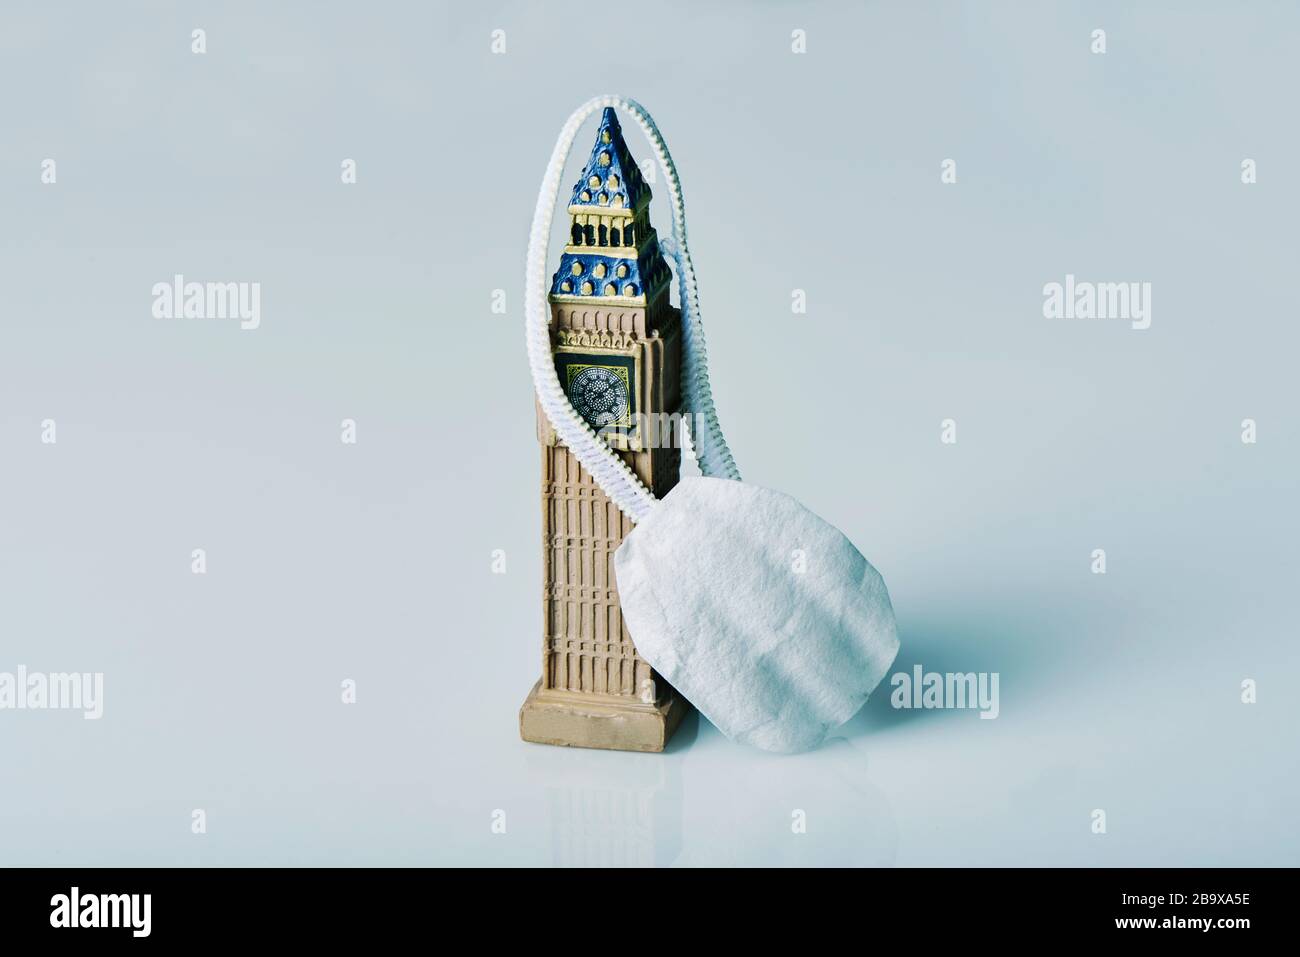 a miniature of the big ben, icon of the United Kingdom, and a face mask on an off-white background Stock Photo